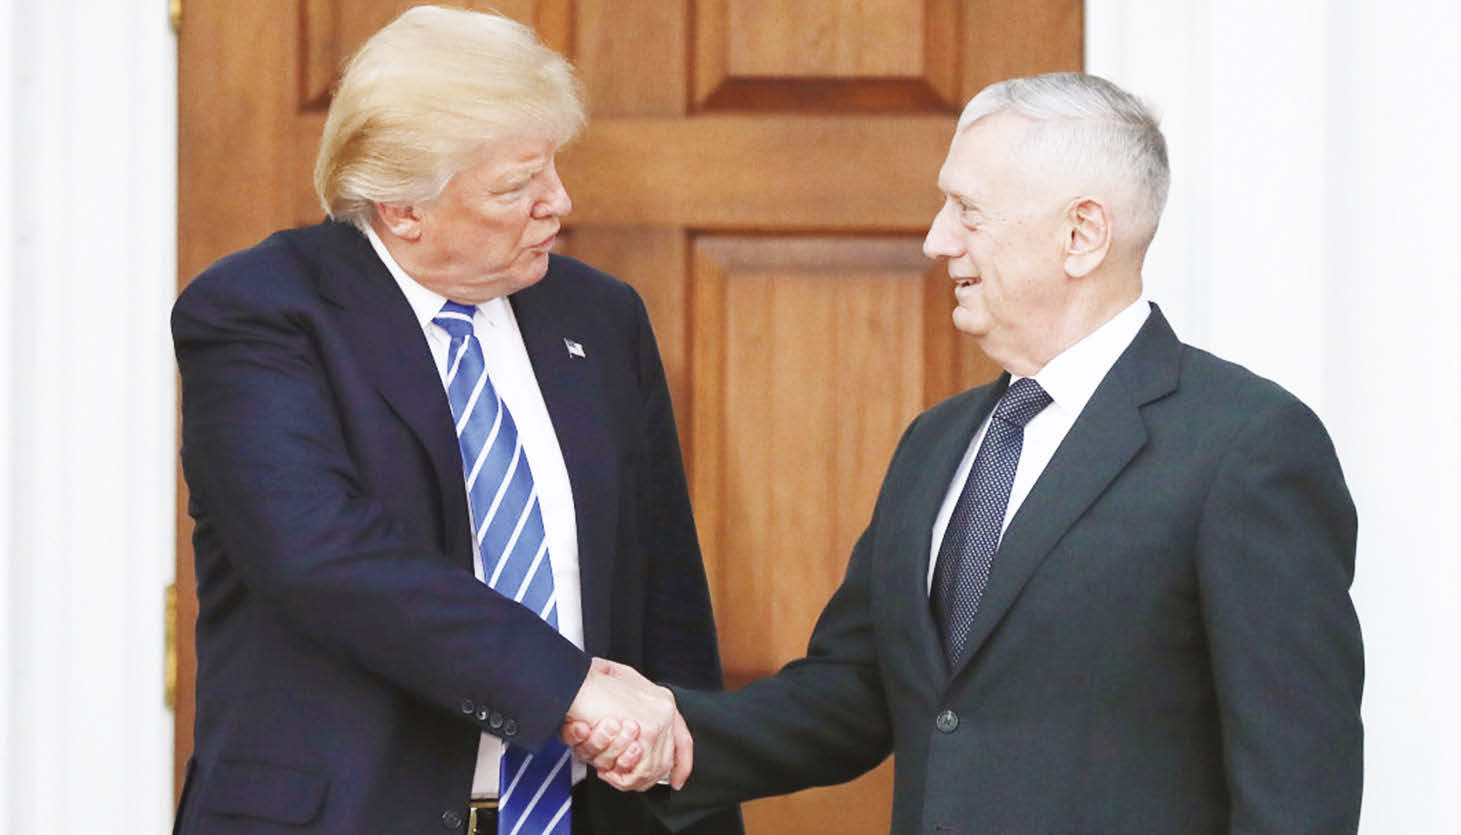 President-elect Donald Trump announced in Ohio, December 1 that 'Mad Dog' General James Mattis will be his defense secretary. Picture shows General Mattis with Trump at Trump Tower in New York